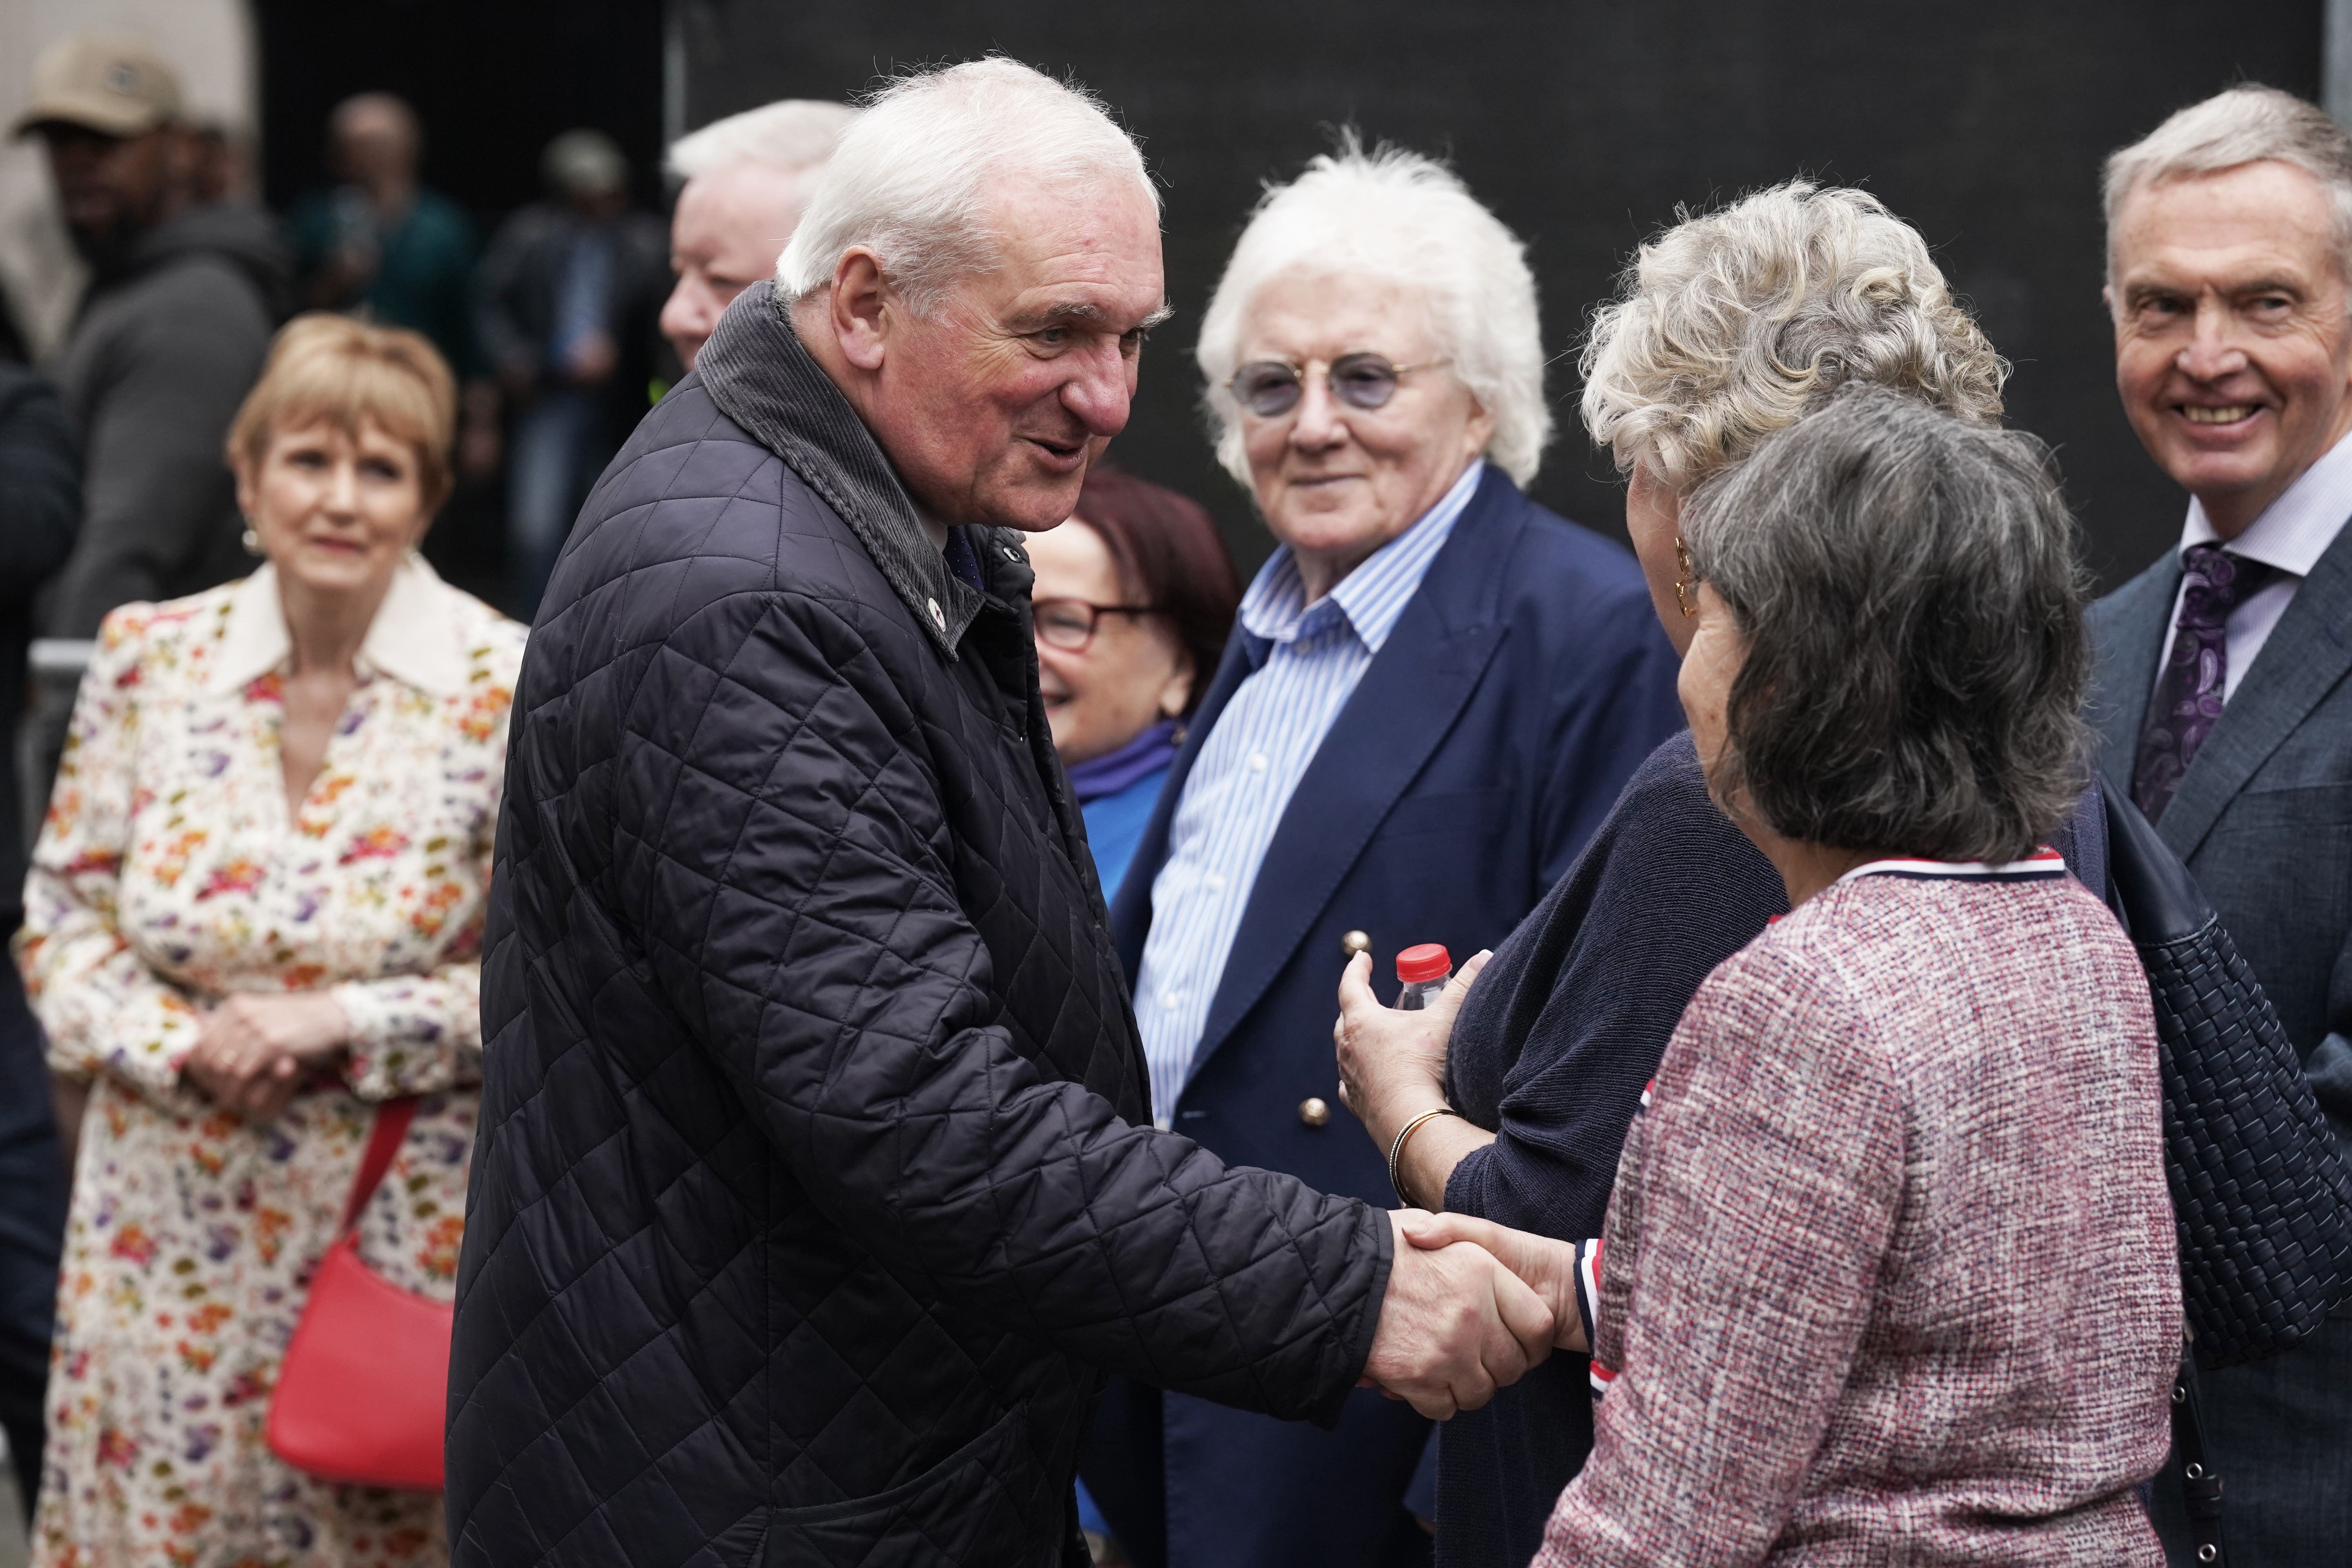 RETRANSMITTING CORRECTING POSITION Former Taoiseach Bertie Ahern (left) arrives for a wreath-laying ceremony at the Memorial to the victims of the Dublin and Monaghan bombings on Talbot Street in Dublin, to mark the 50th anniversary of the Dublin and Monaghan bombings. Picture date: Friday May 17, 2024.